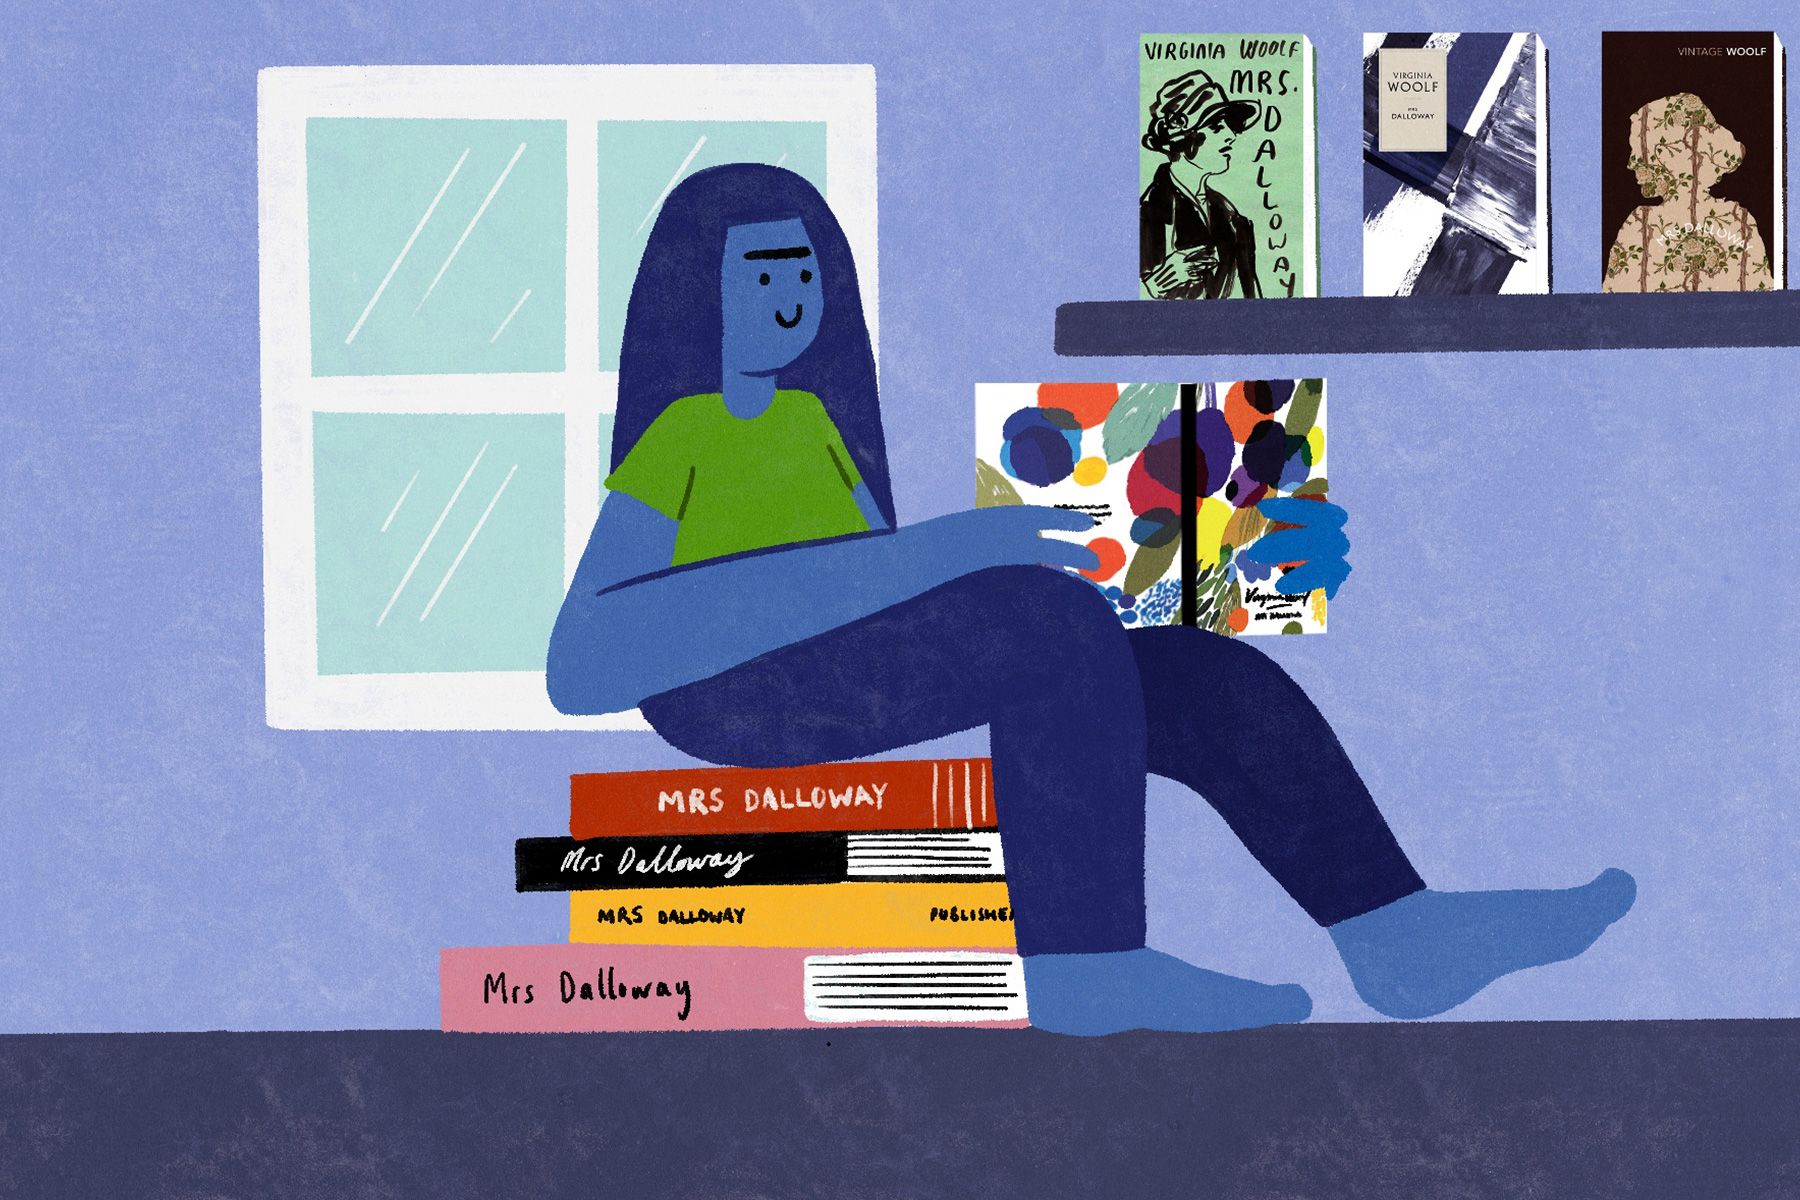 An illustration of a woman sitting on a pile of copies of Mrs Dalloway, reading Mrs Dalloway, next to a shelf of other copies of Mrs Dalloway